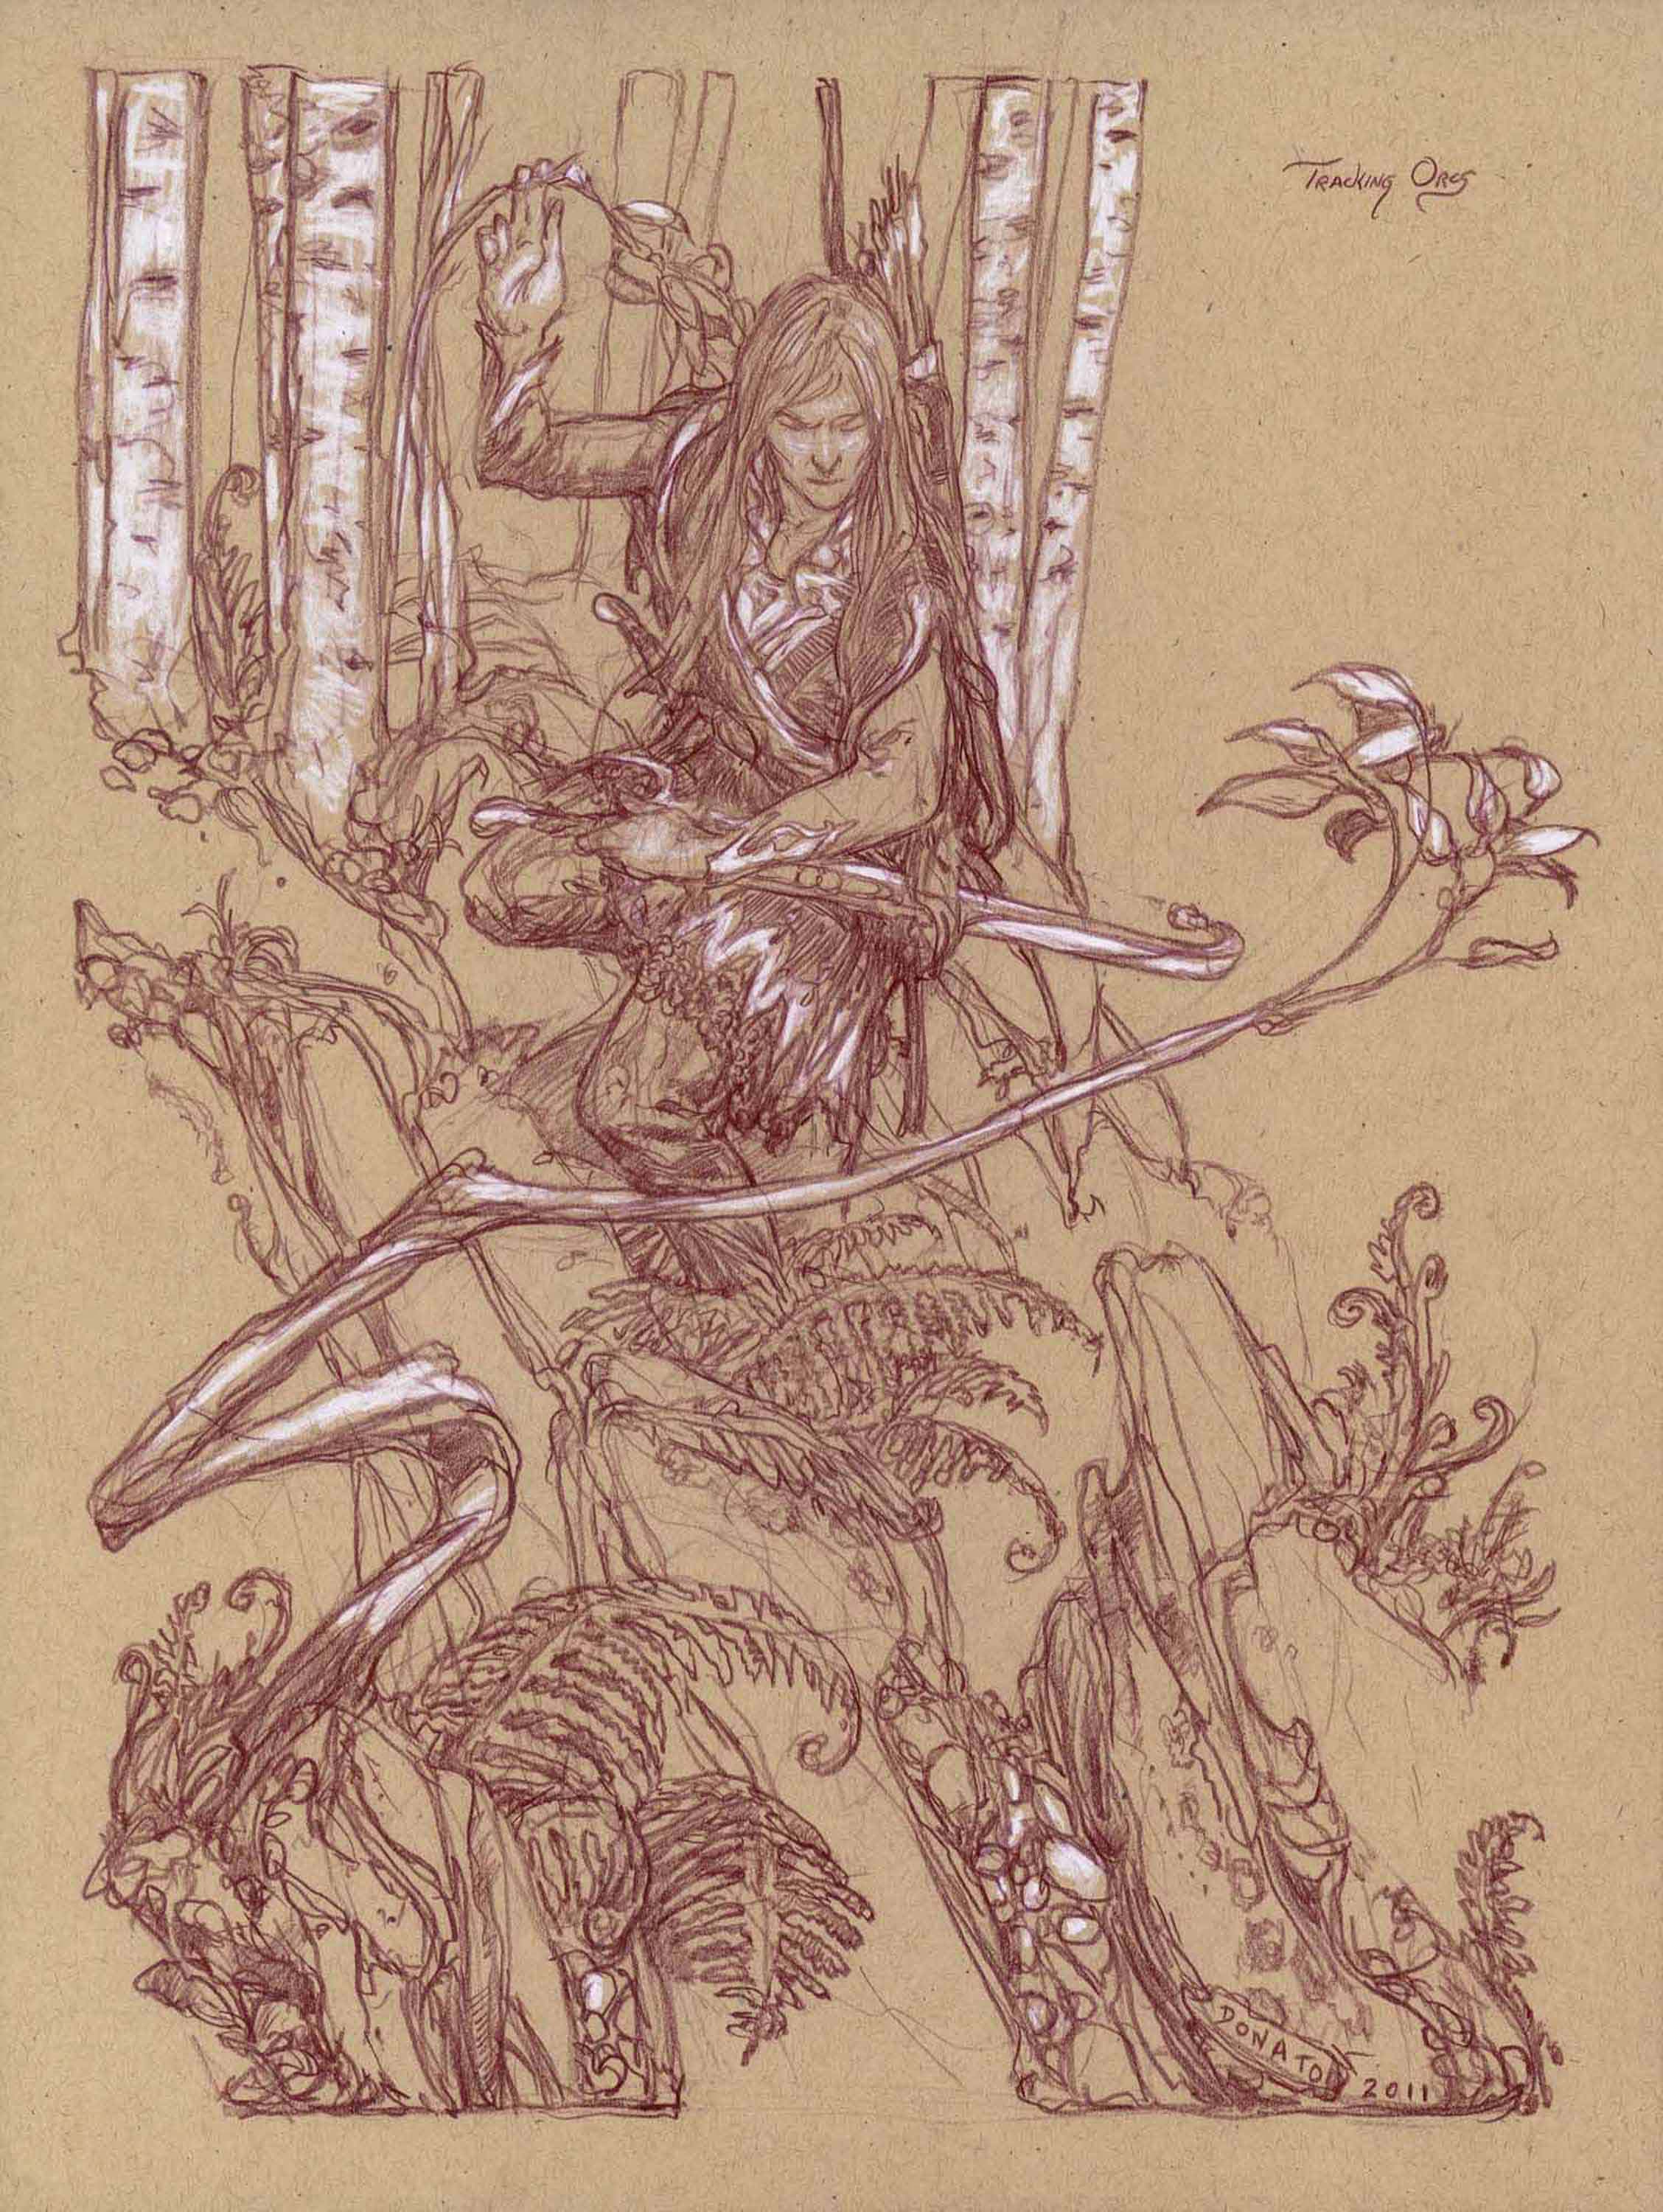 Beleg Tracking Orcs
14" x11"  Watercolor Pencil and Chalk on Toned paper 2011
collection of the artist